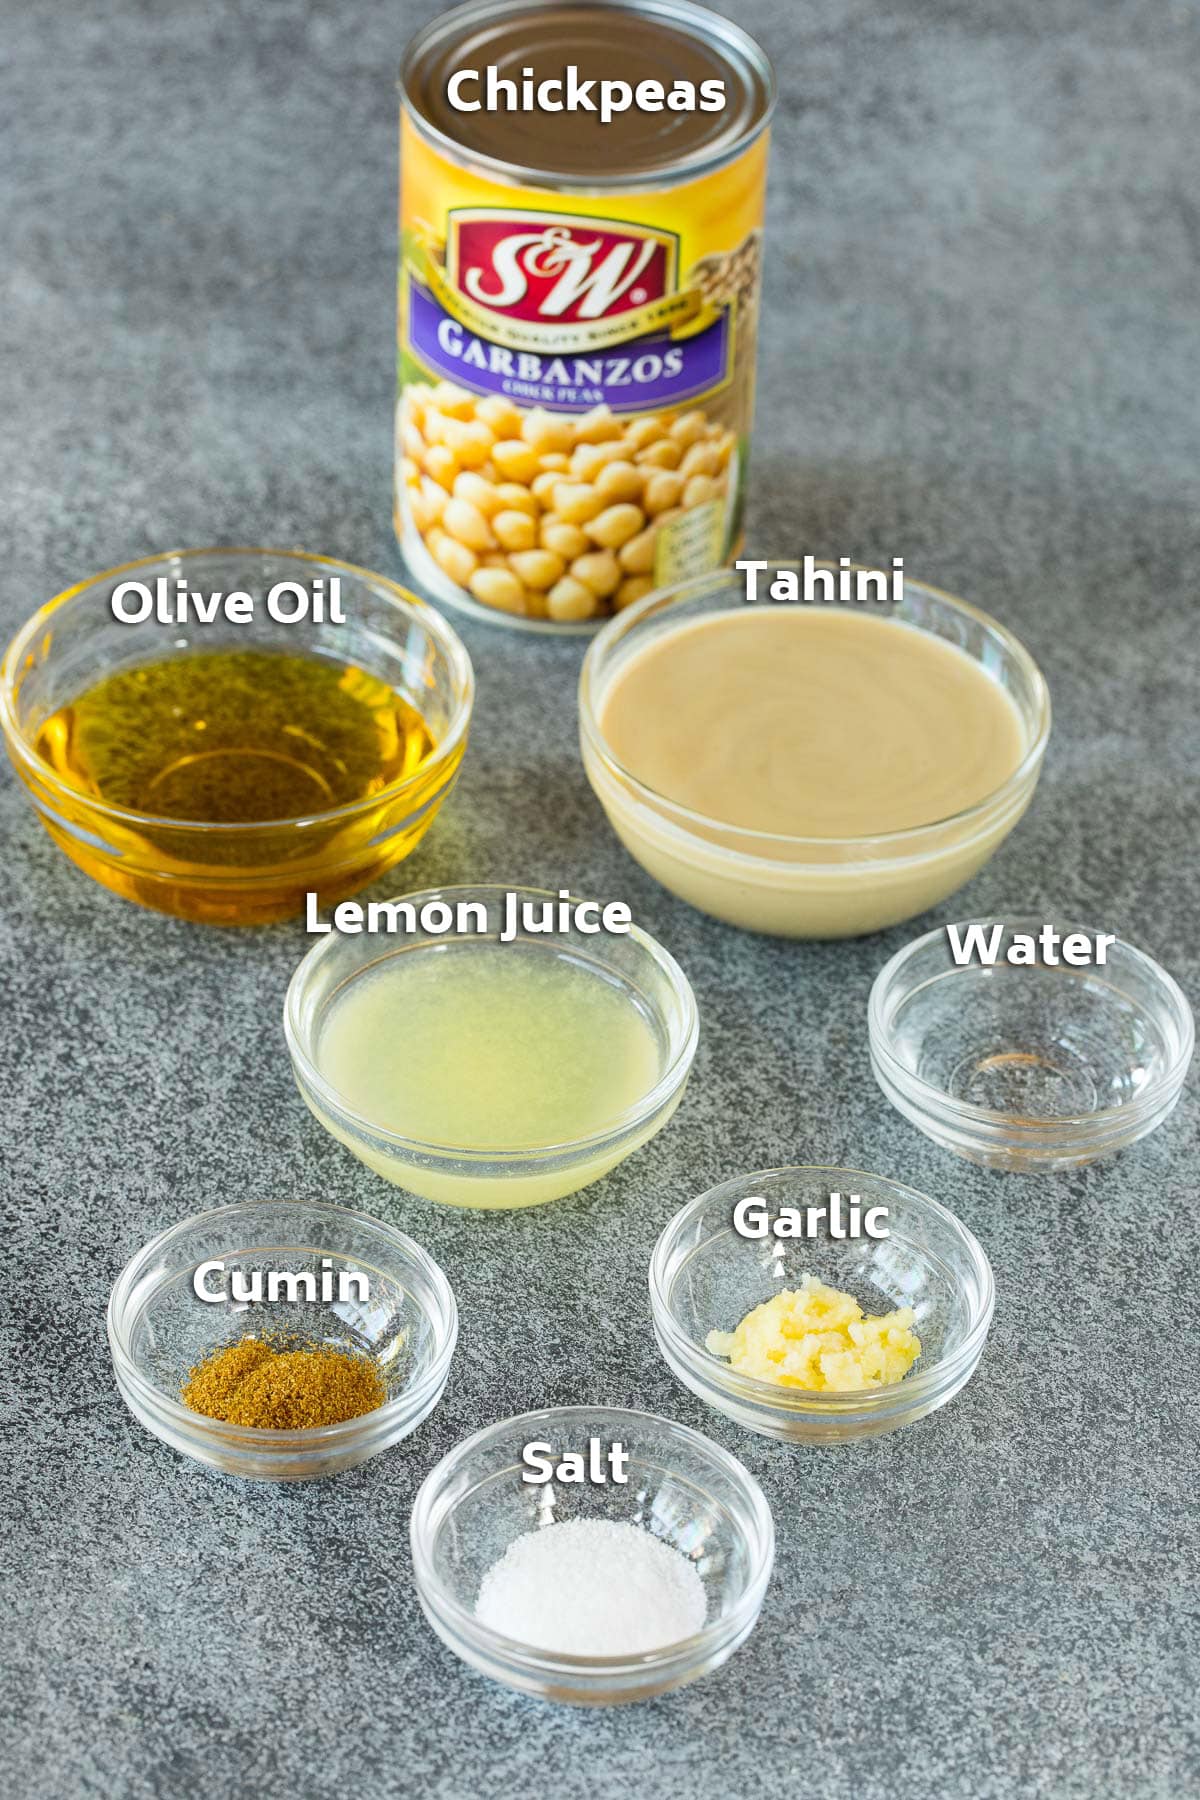 Ingredients including a can of chickpeas, and bowls filled with lemon juice, tahini, olive oil and spices.